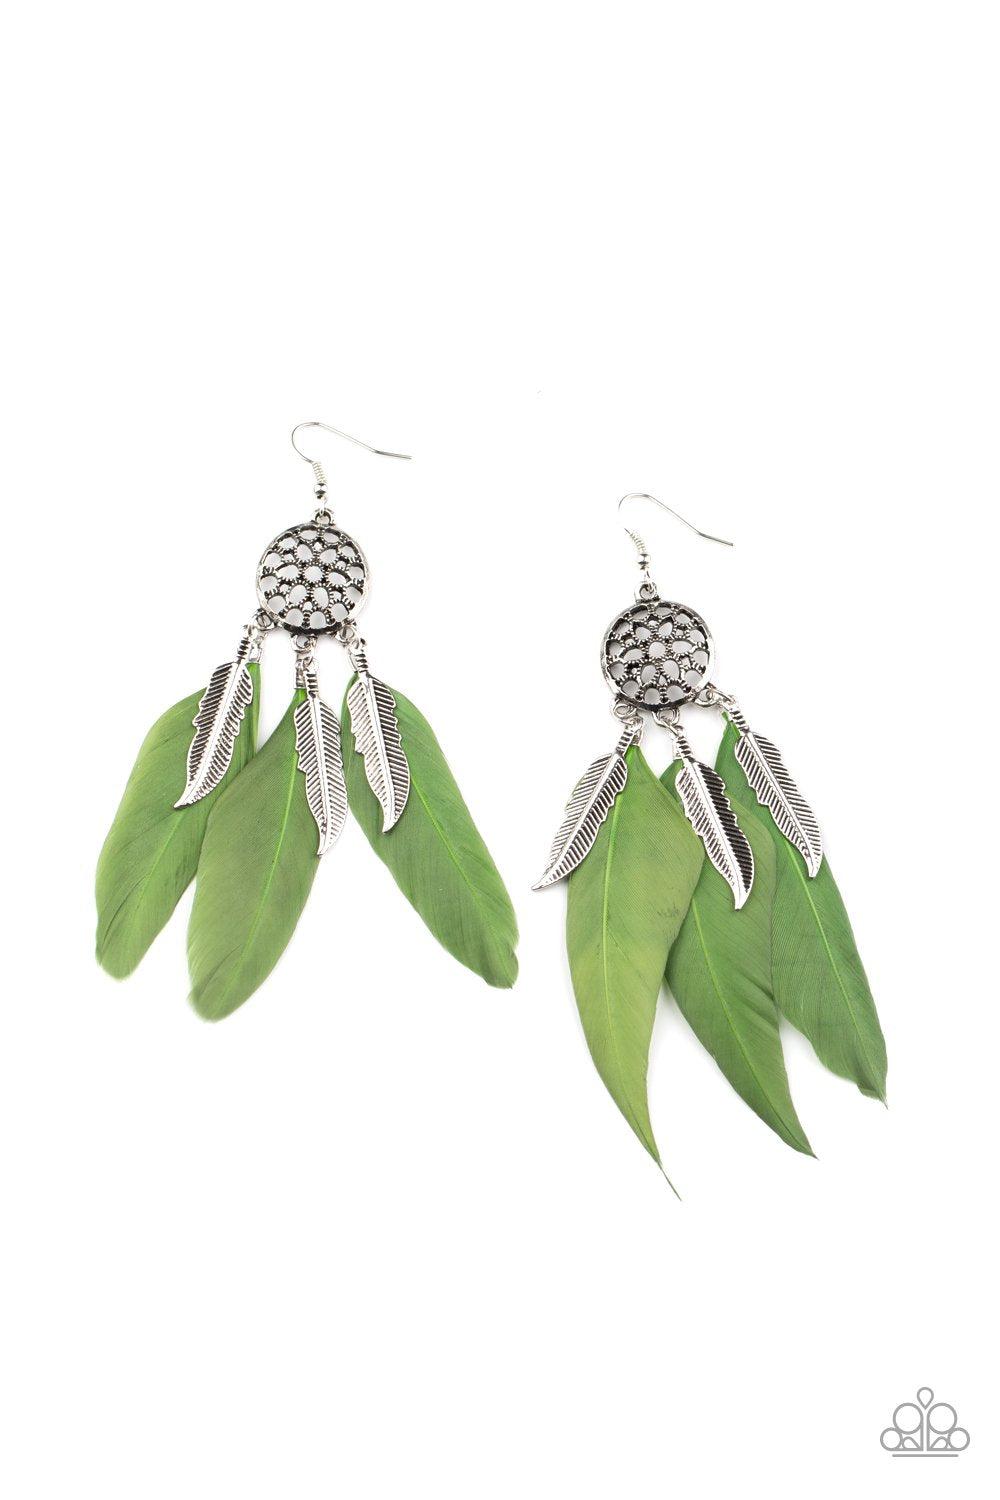 In Your Wildest DREAM-CATCHERS Green Feather Earrings - Paparazzi Accessories - lightbox -CarasShop.com - $5 Jewelry by Cara Jewels